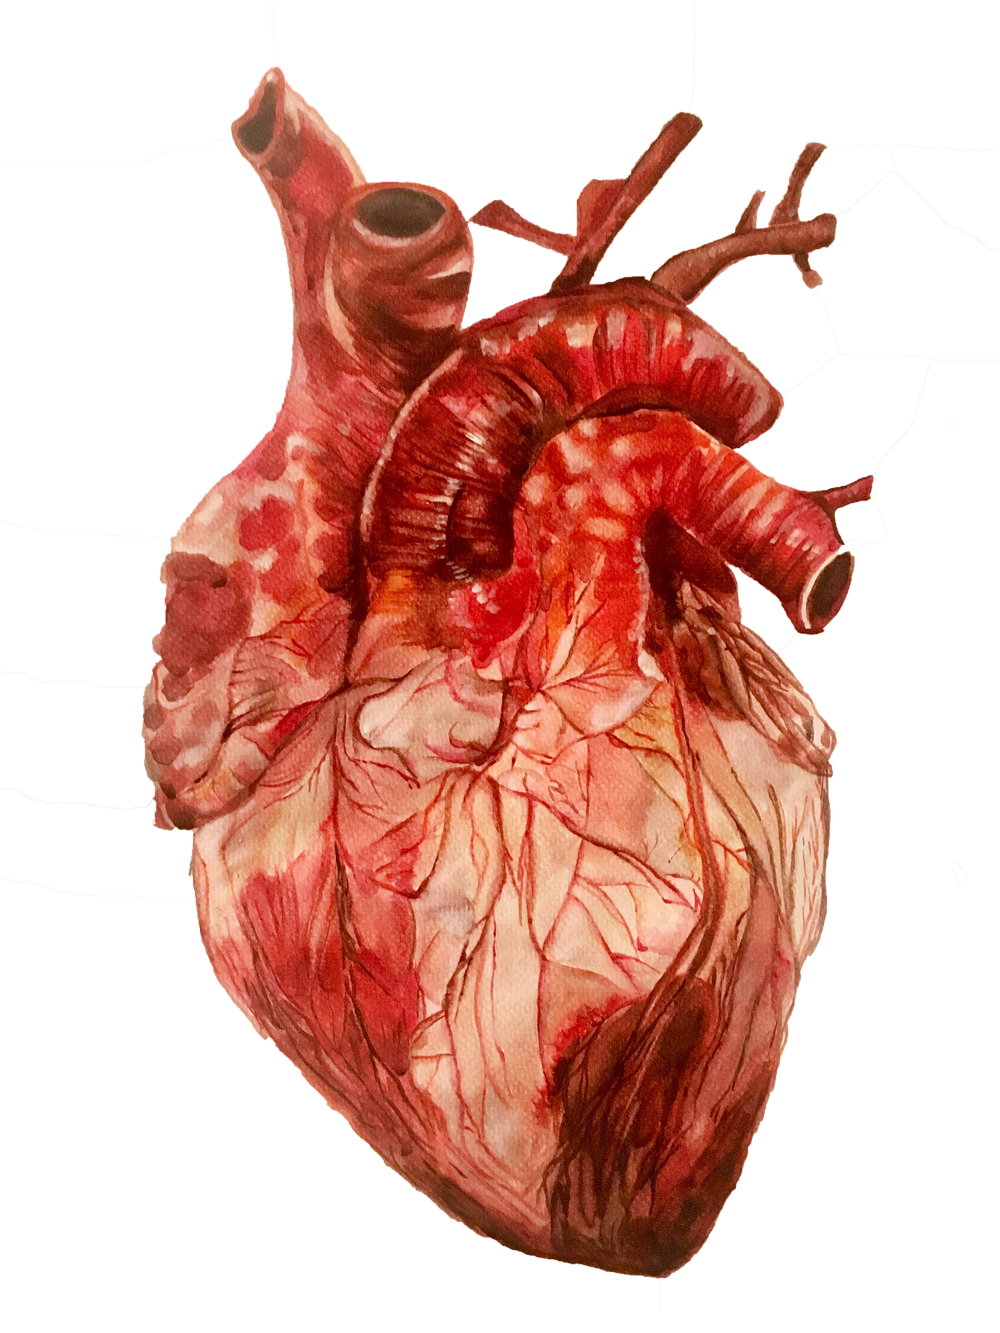 Anatomical-Heart-PNG-High-Quality-Image.